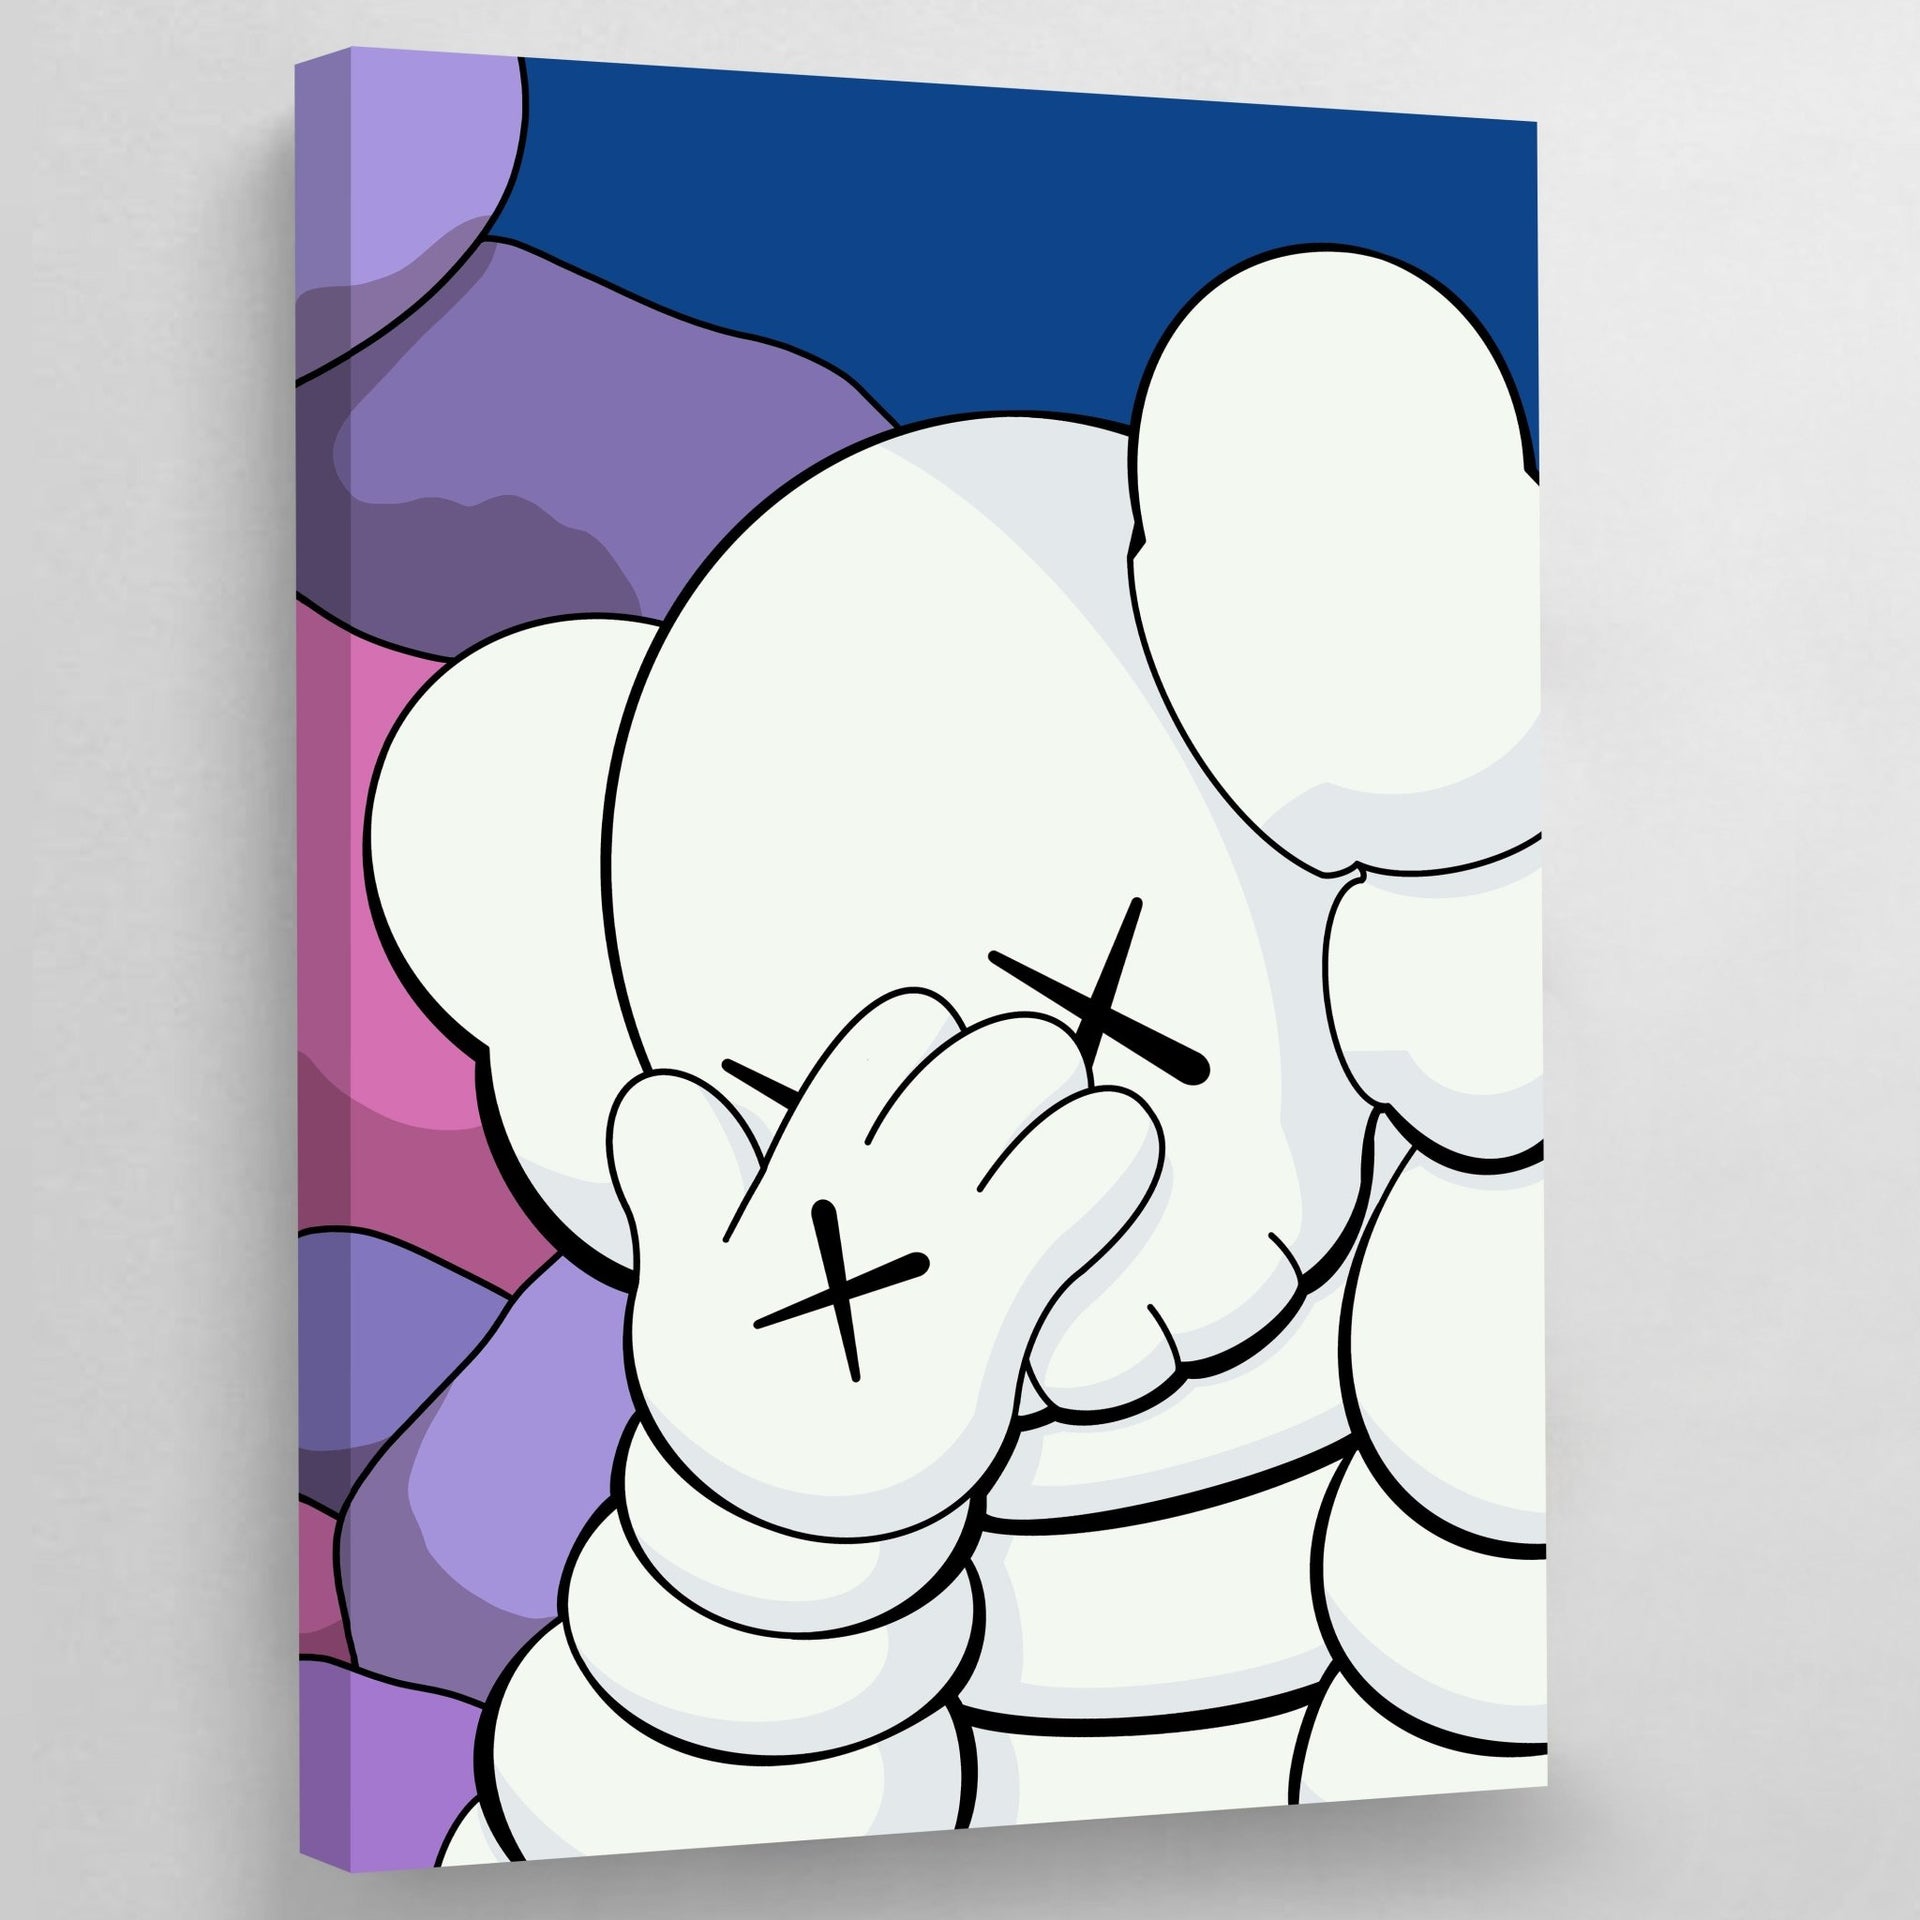 Black and White Kaws Poster sold by Remedial Attitude